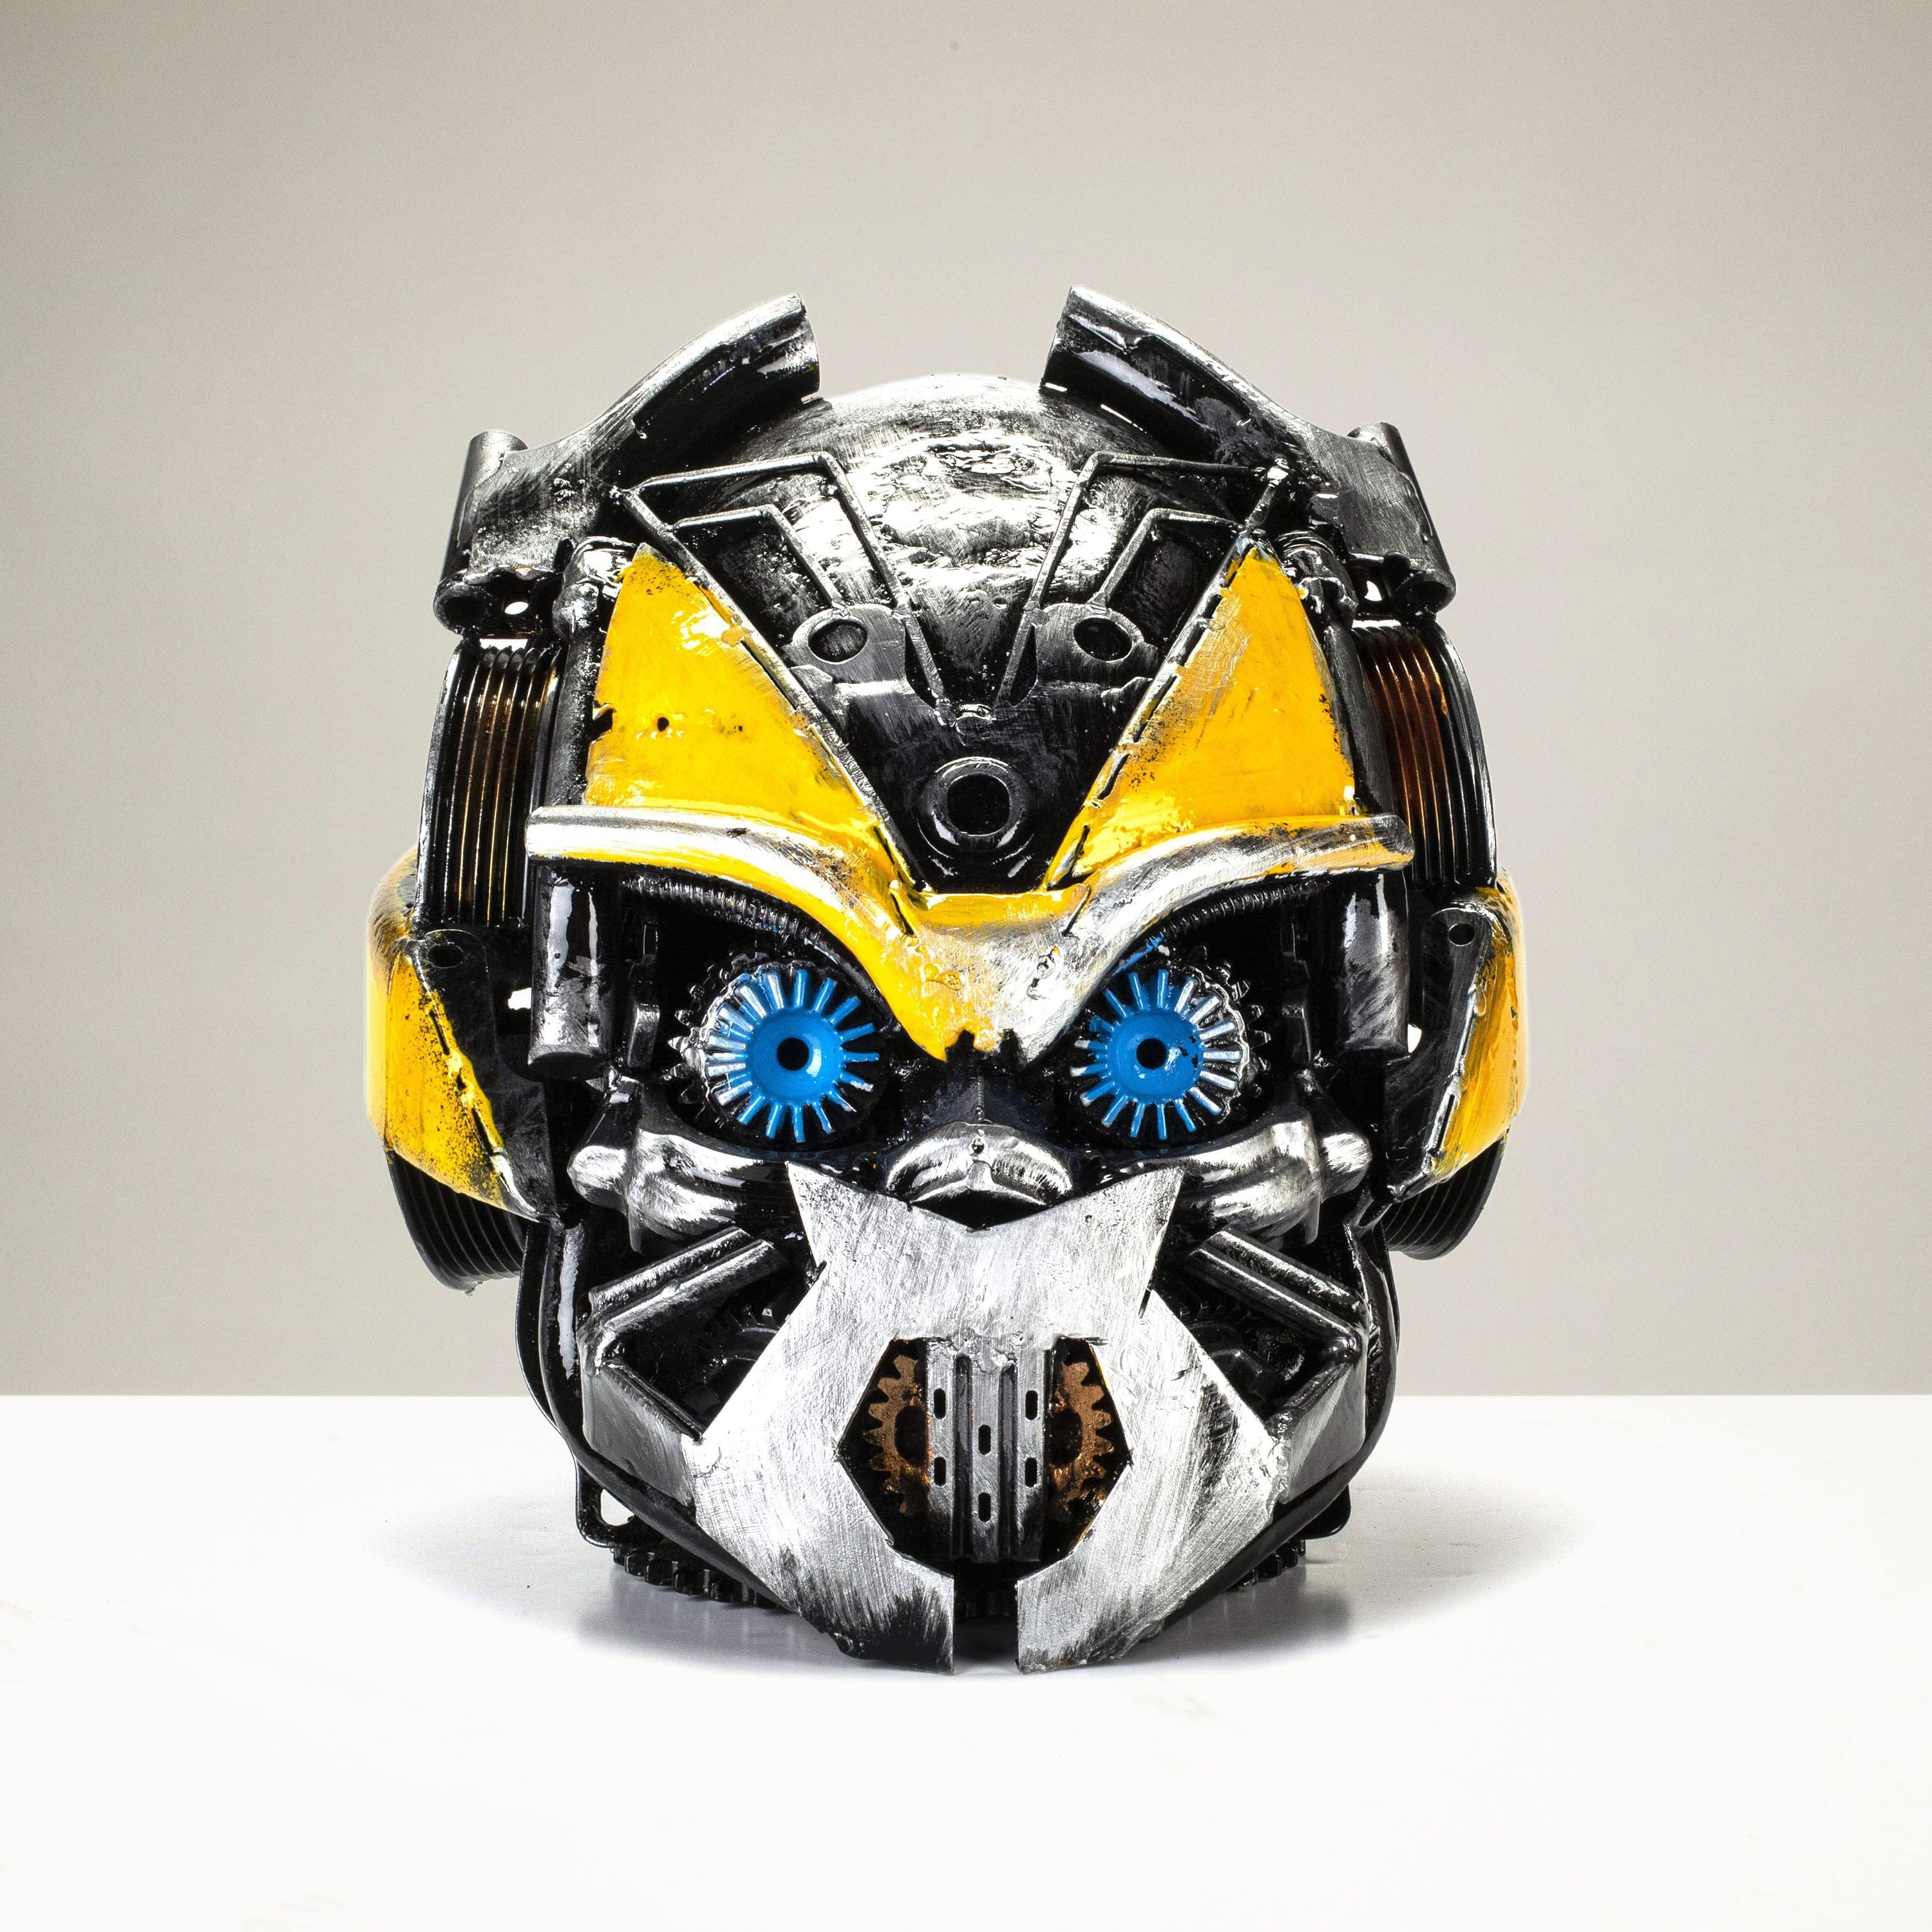 Kalifano Recycled Metal Art BumbleBee Head Inspired Recycled Metal Art Sculpture RMS-HEAD-BB